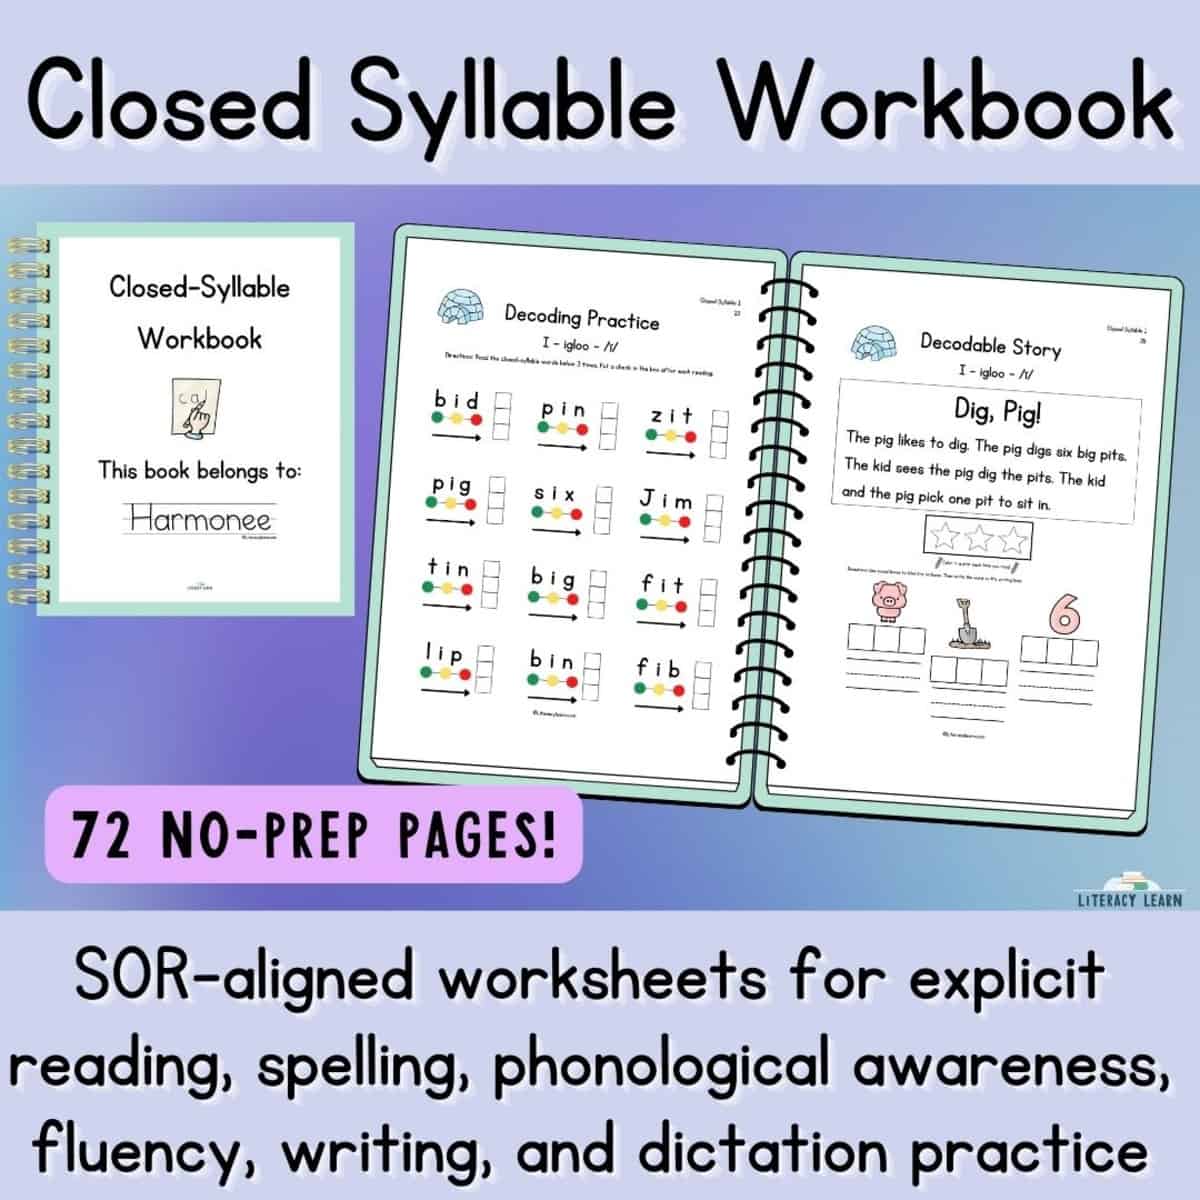 Graphic showing a closed-syllable workbook with sample no-prep pages for CVC words and words with digraphs.